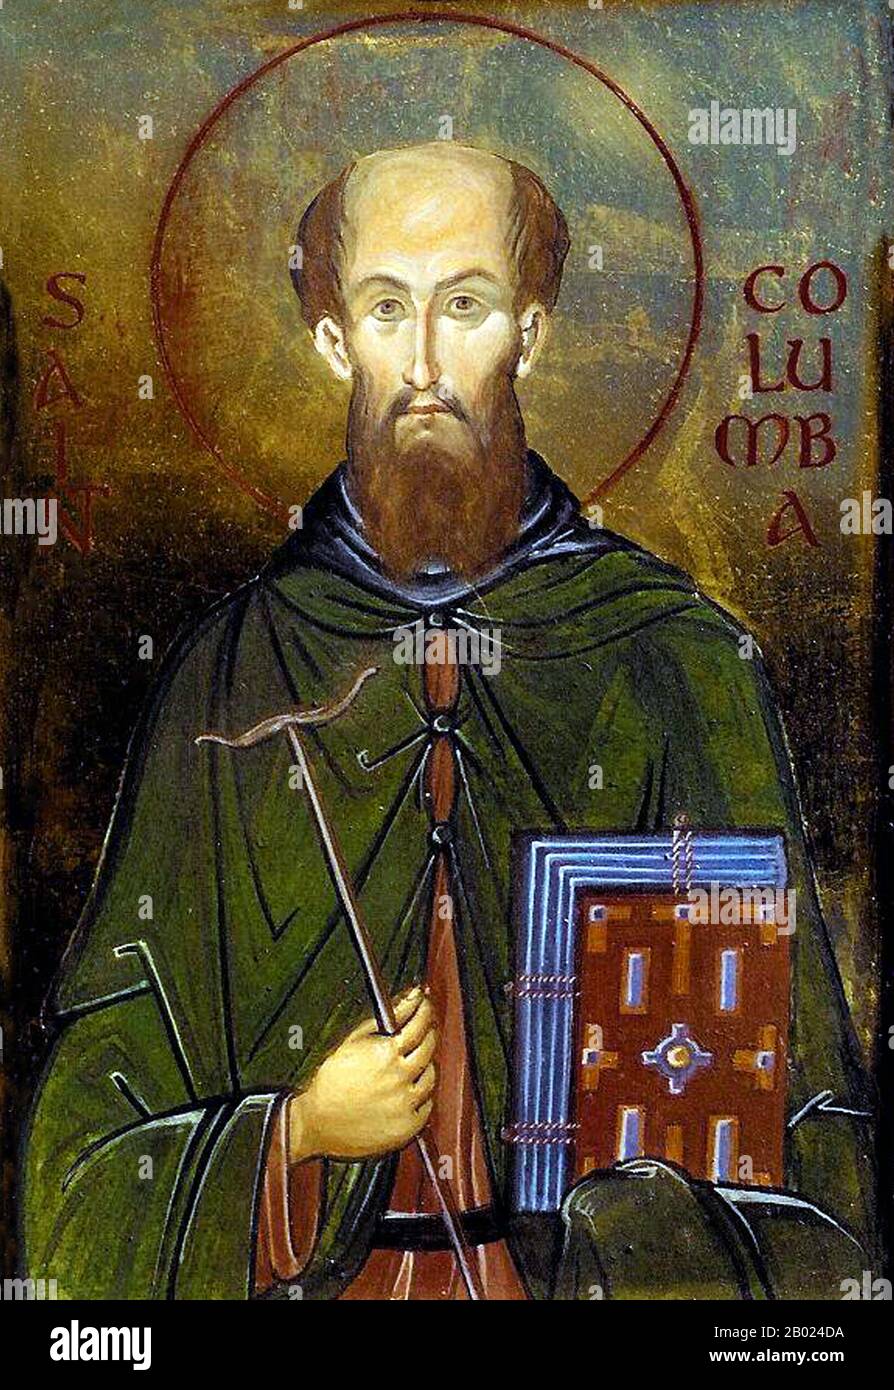 Saint Columba (7 December 521 – 9 June 597 AD)—also known as Colum Cille, or Chille (Old Irish, meaning 'dove of the church'), Colm Cille (Irish), Calum Cille (Scottish Gaelic), Colum Keeilley (Manx Gaelic) and Kolban or Kolbjørn (Old Norse)—was a Gaelic Irish missionary monk who propagated Christianity among the Picts during the Early Medieval Period. He was one of the Twelve Apostles of Ireland. Stock Photo